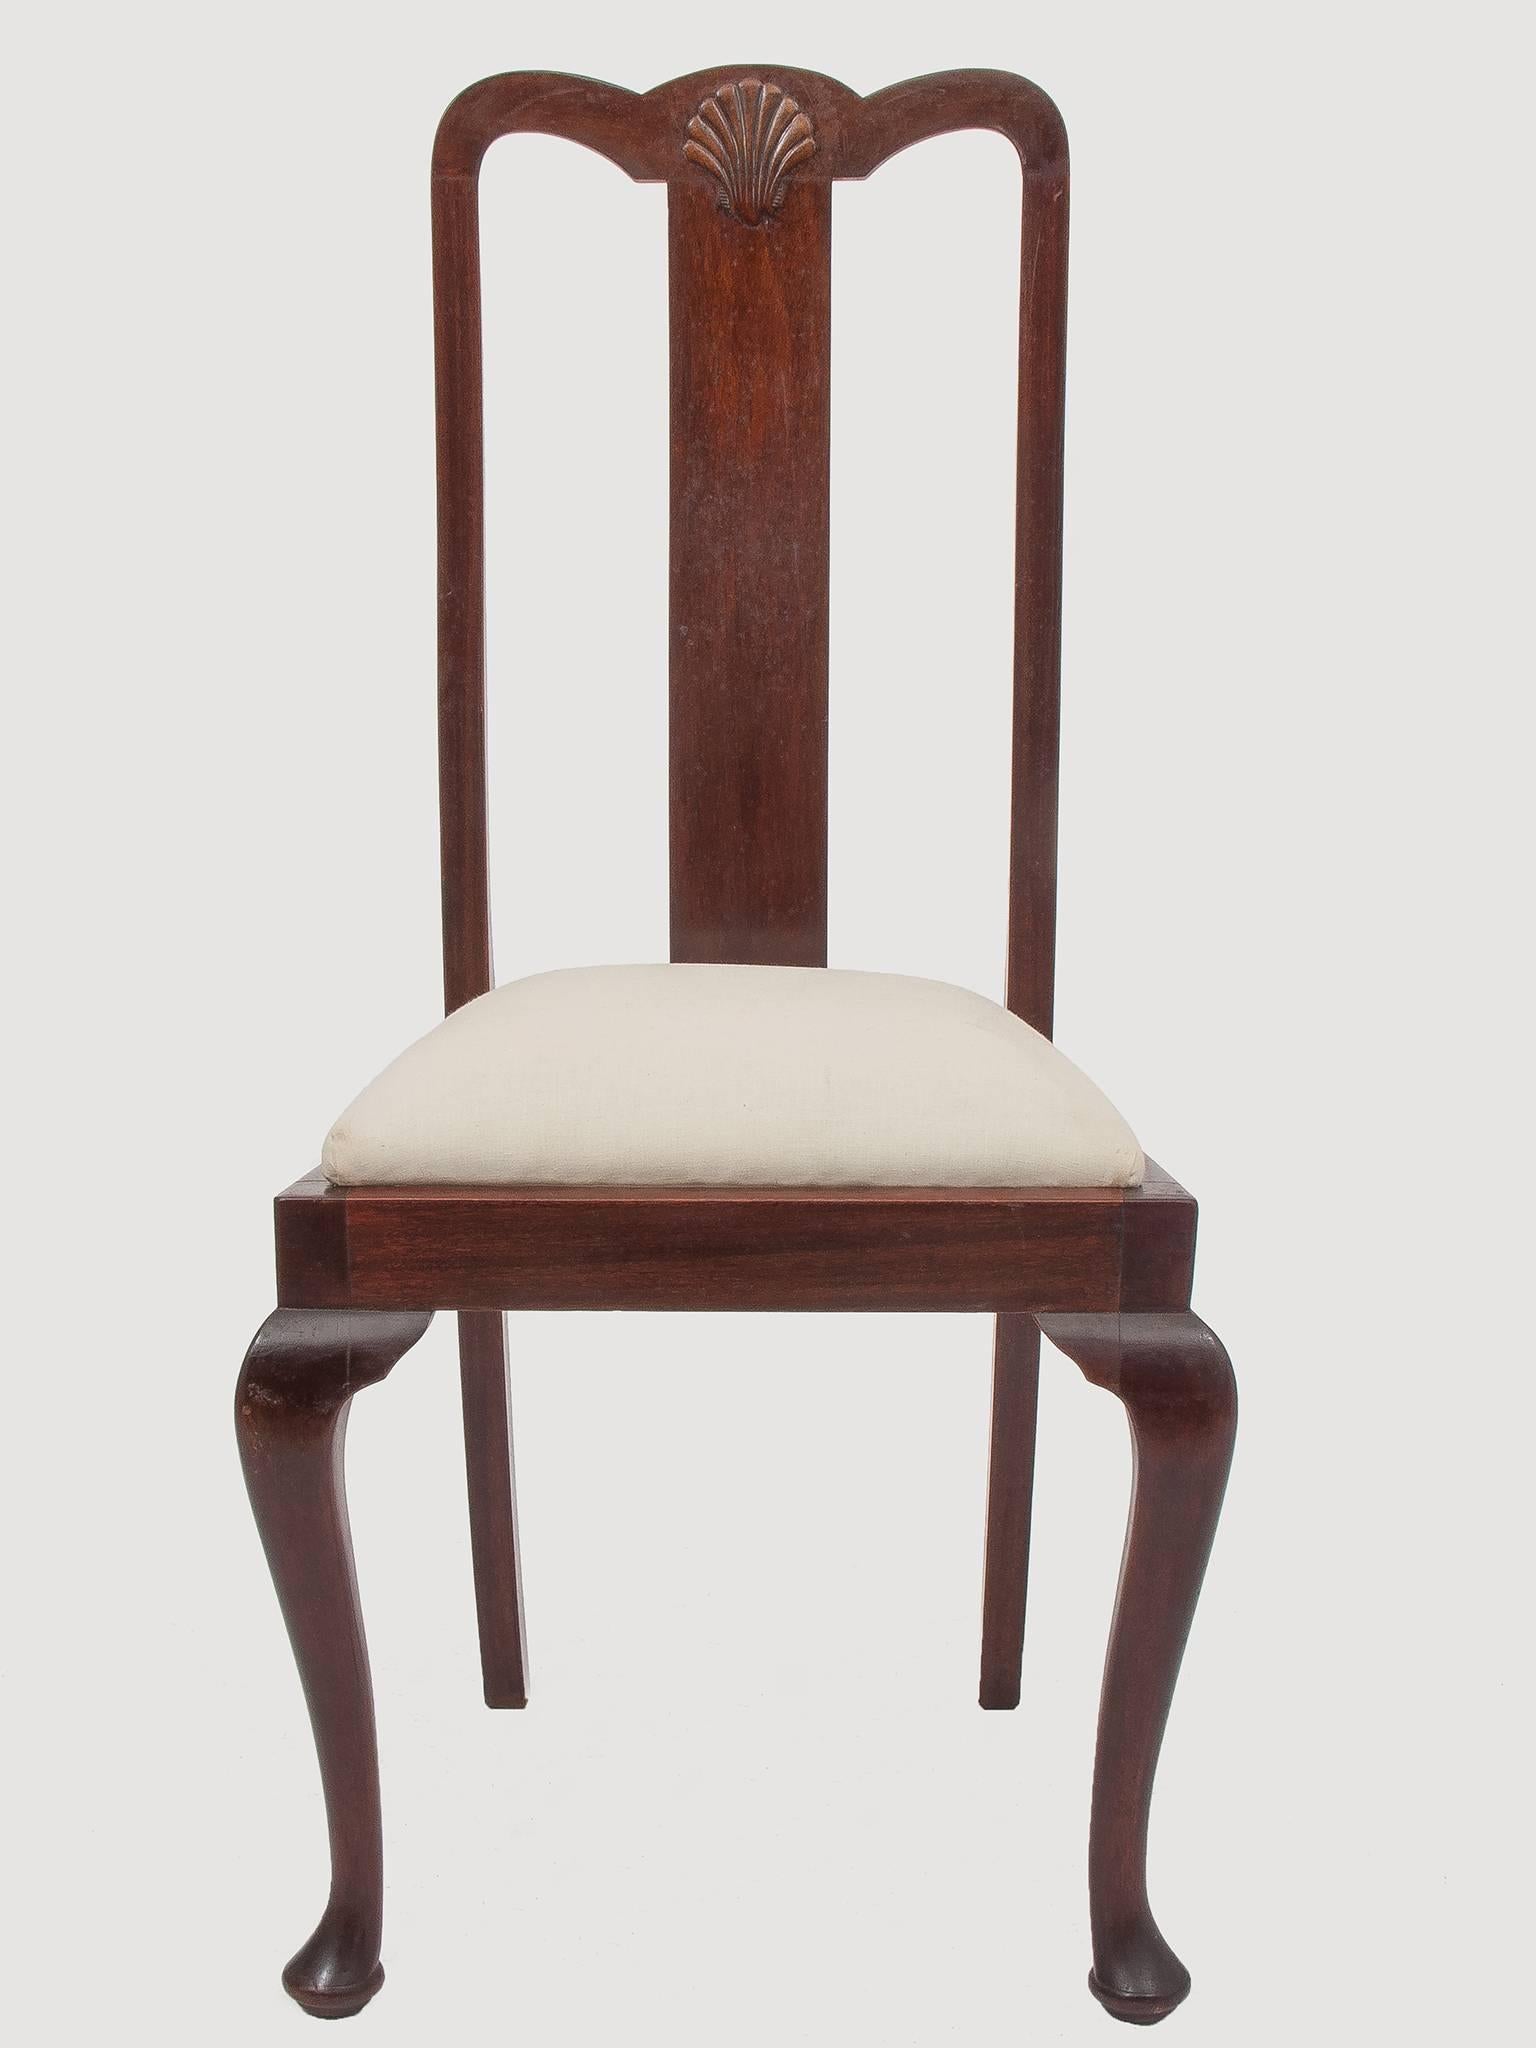 M/416, six Queen Anne mahogany dining chairs, COMPLETE with two high chairs  LU137927942893 -
All set is new upholstered, high chairs also.
Interesting minimum price for 8 items (for closing activities) .!!!! 4.200 € from initial 8400 €.